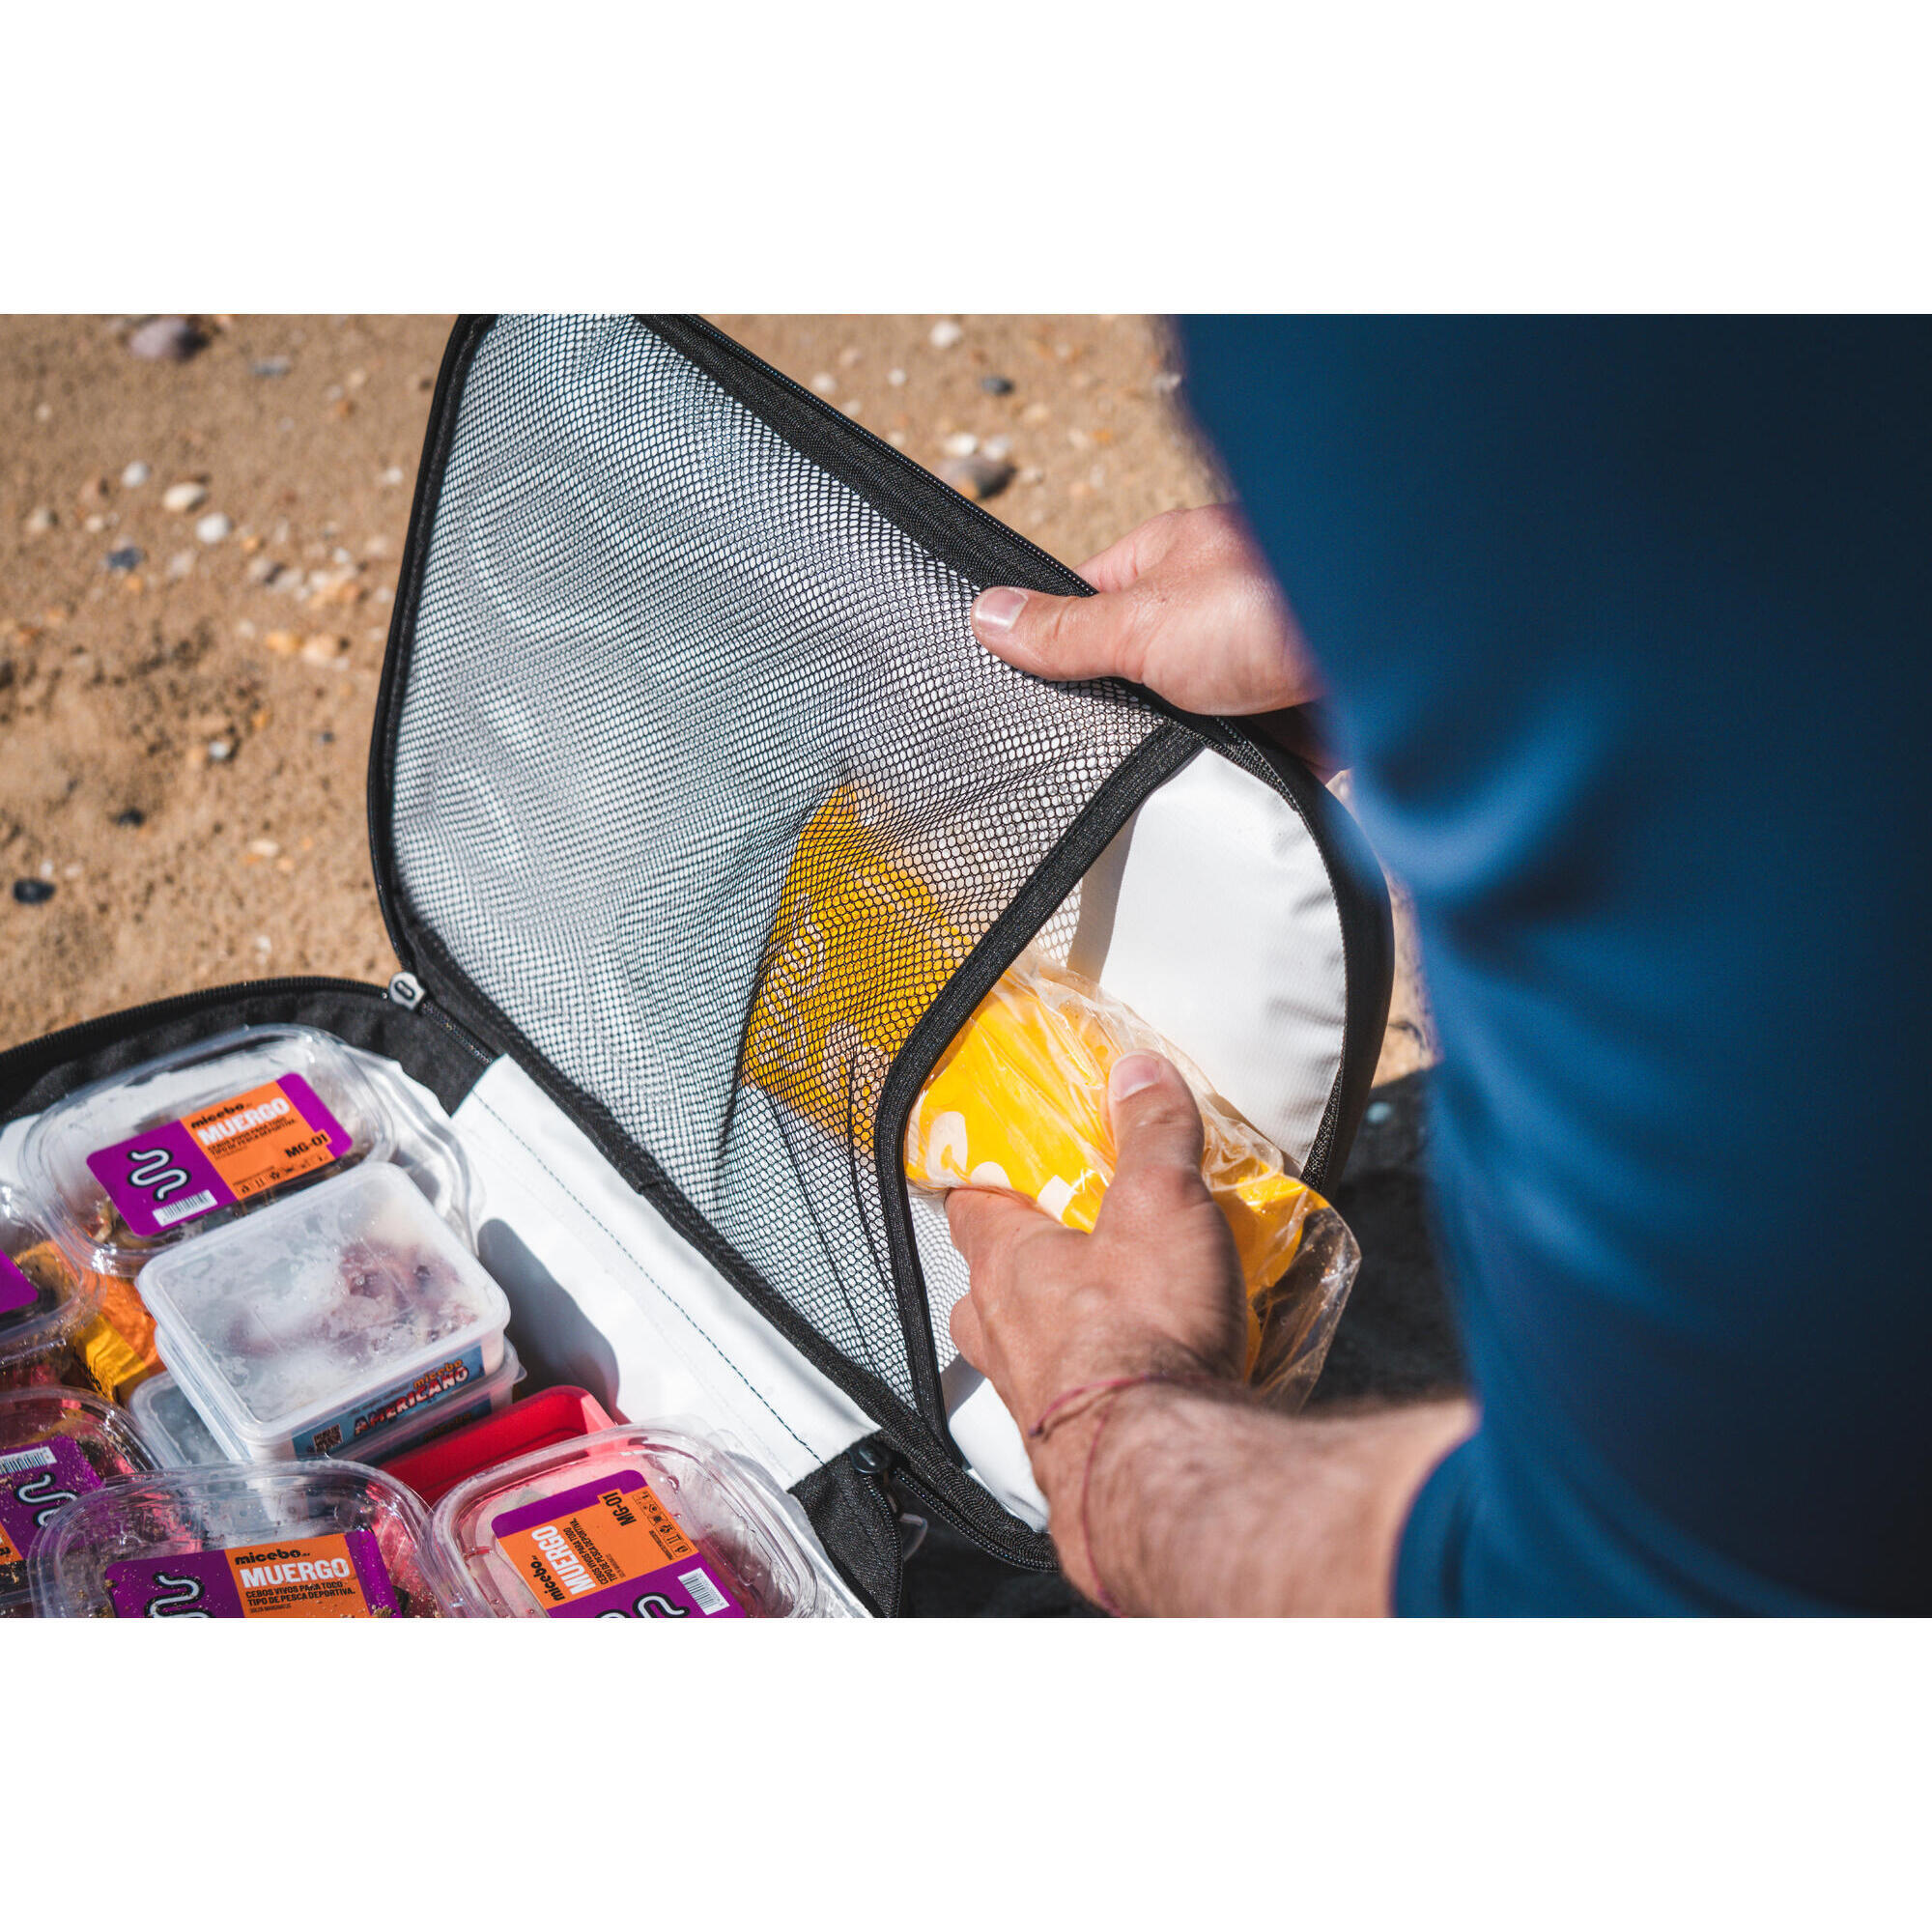 XL 20 L fishing cool bag - Keeps cool for 8 hours 30 minutes - 20L 4/5